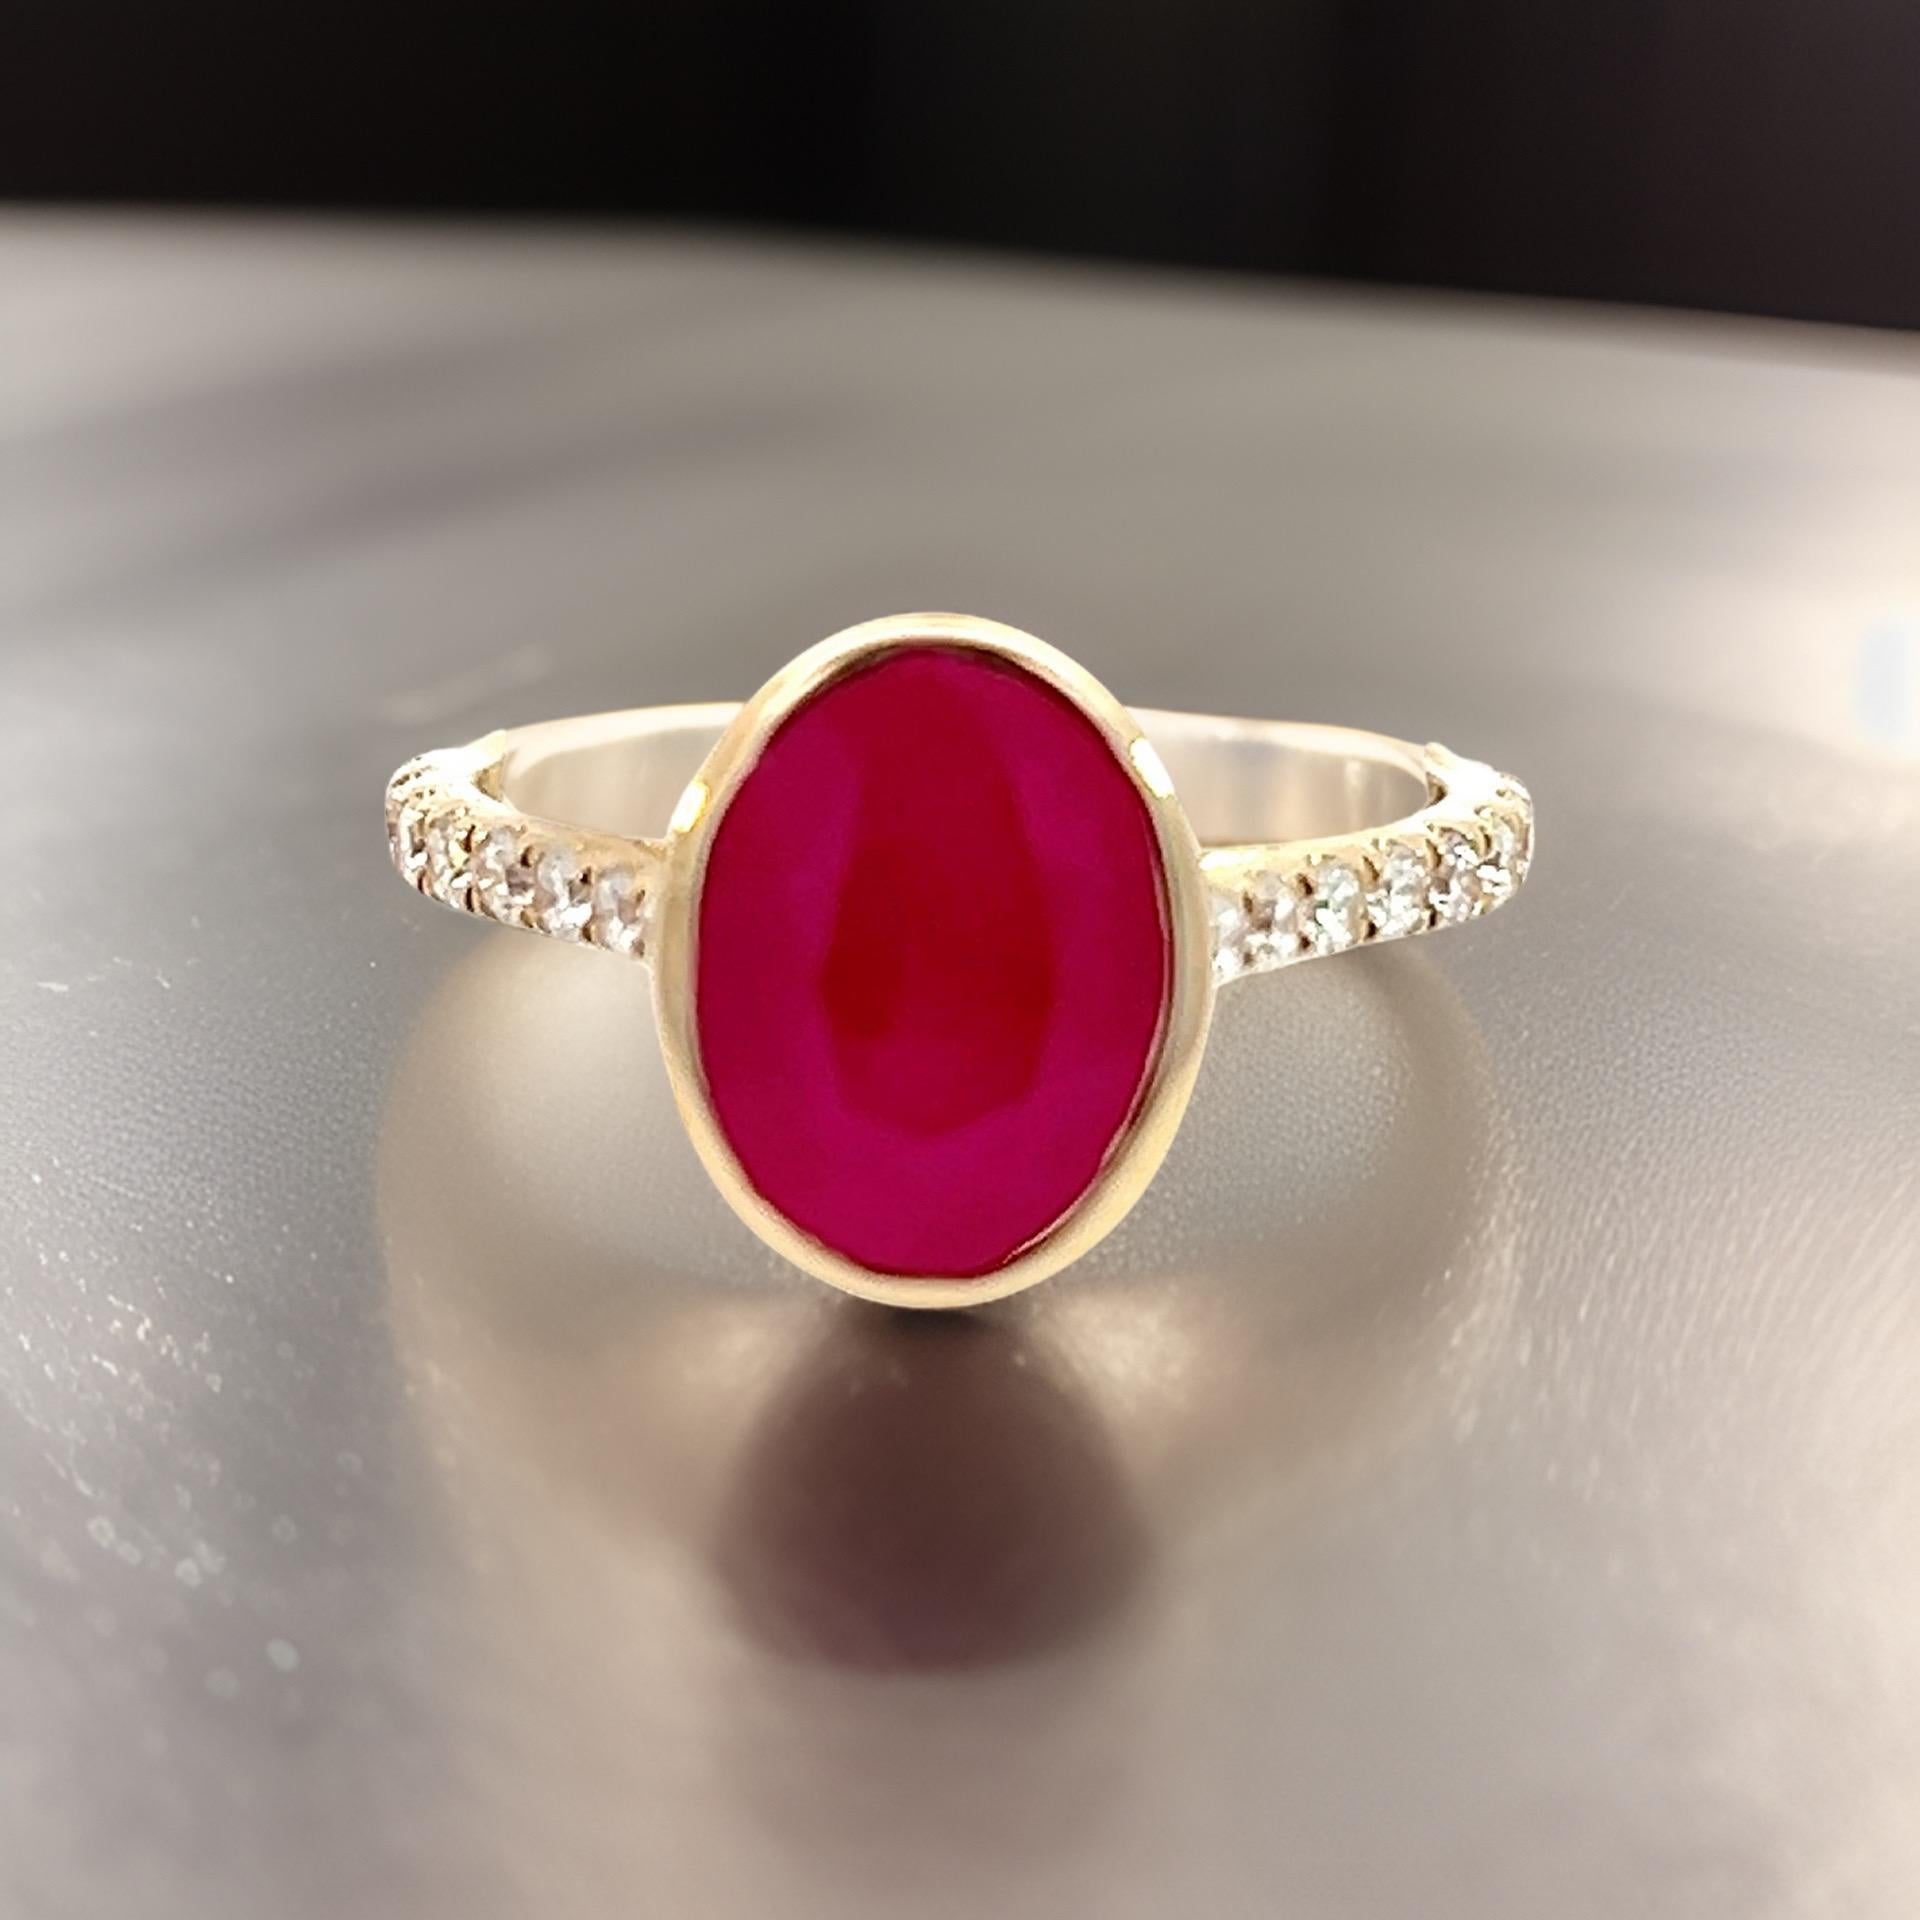 Natural Ruby Diamond Ring 6.75 14k Y Gold 4.38 TCW Certified For Sale 9